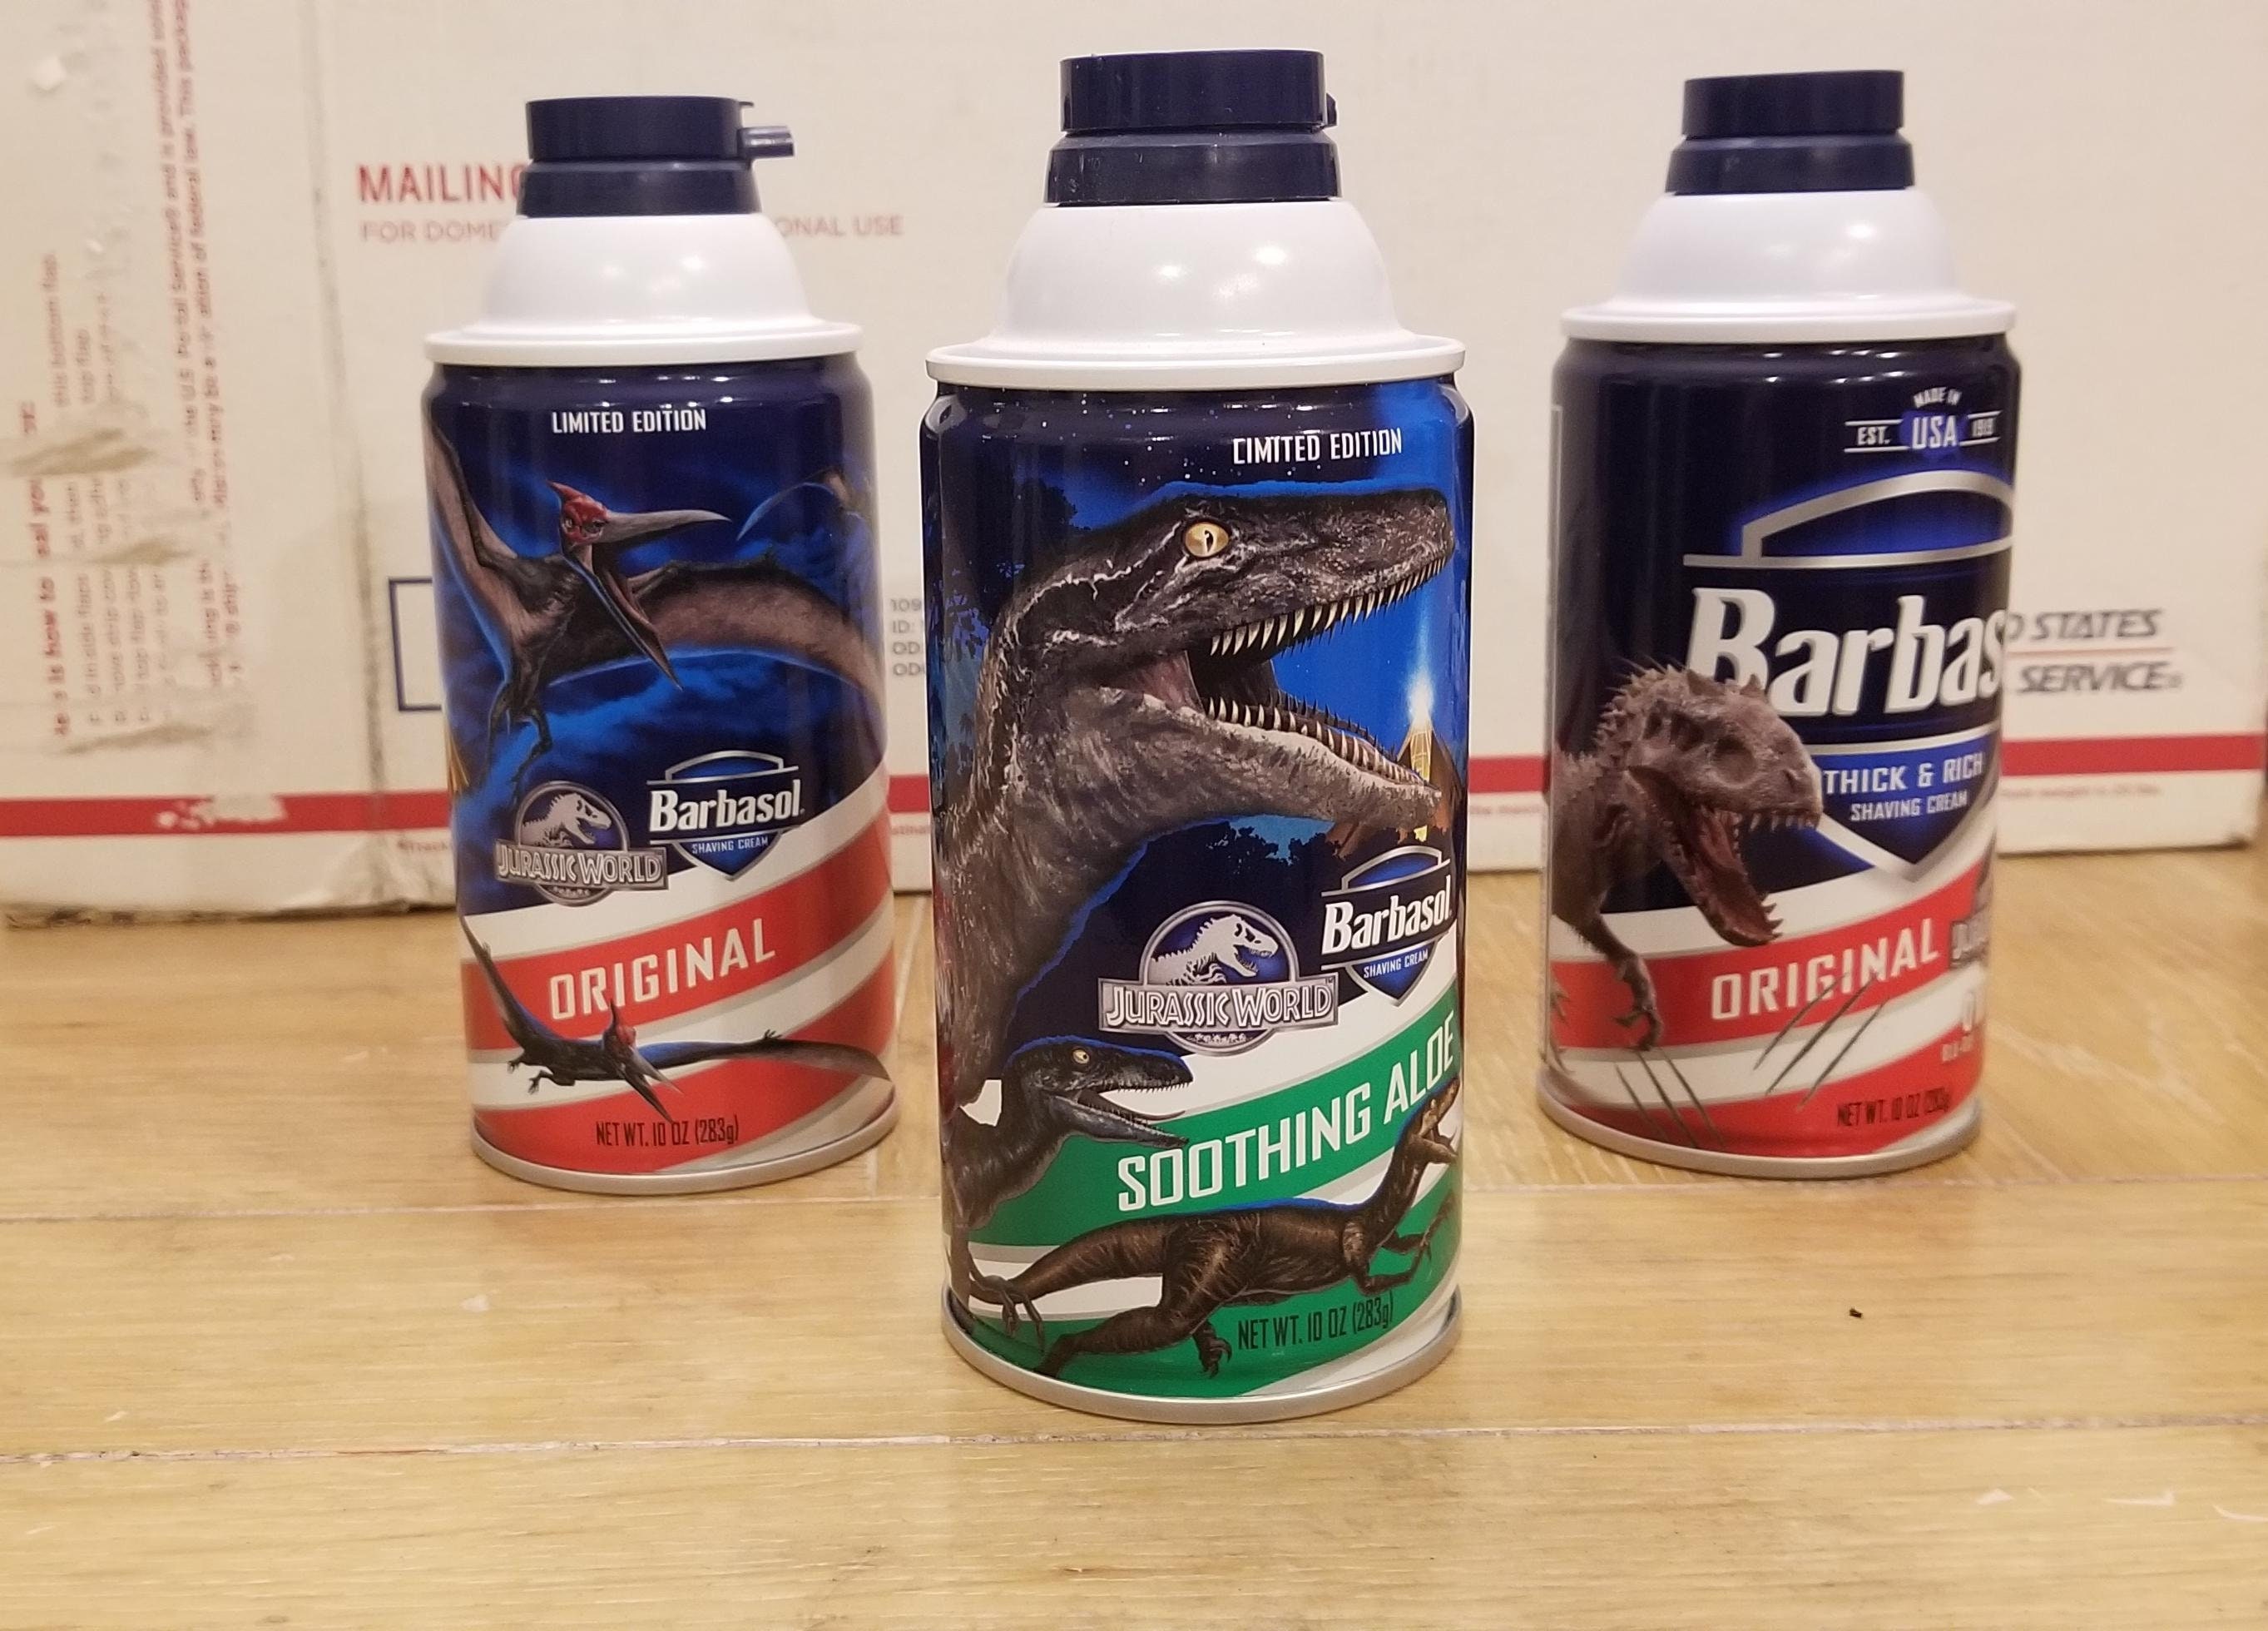 Limited Edition Barbasol Shave Cream Can Converted Into a Diversion Safe  AKA Stash Can Jurassic World Park Dinosaur Rare Find Unique Gift 